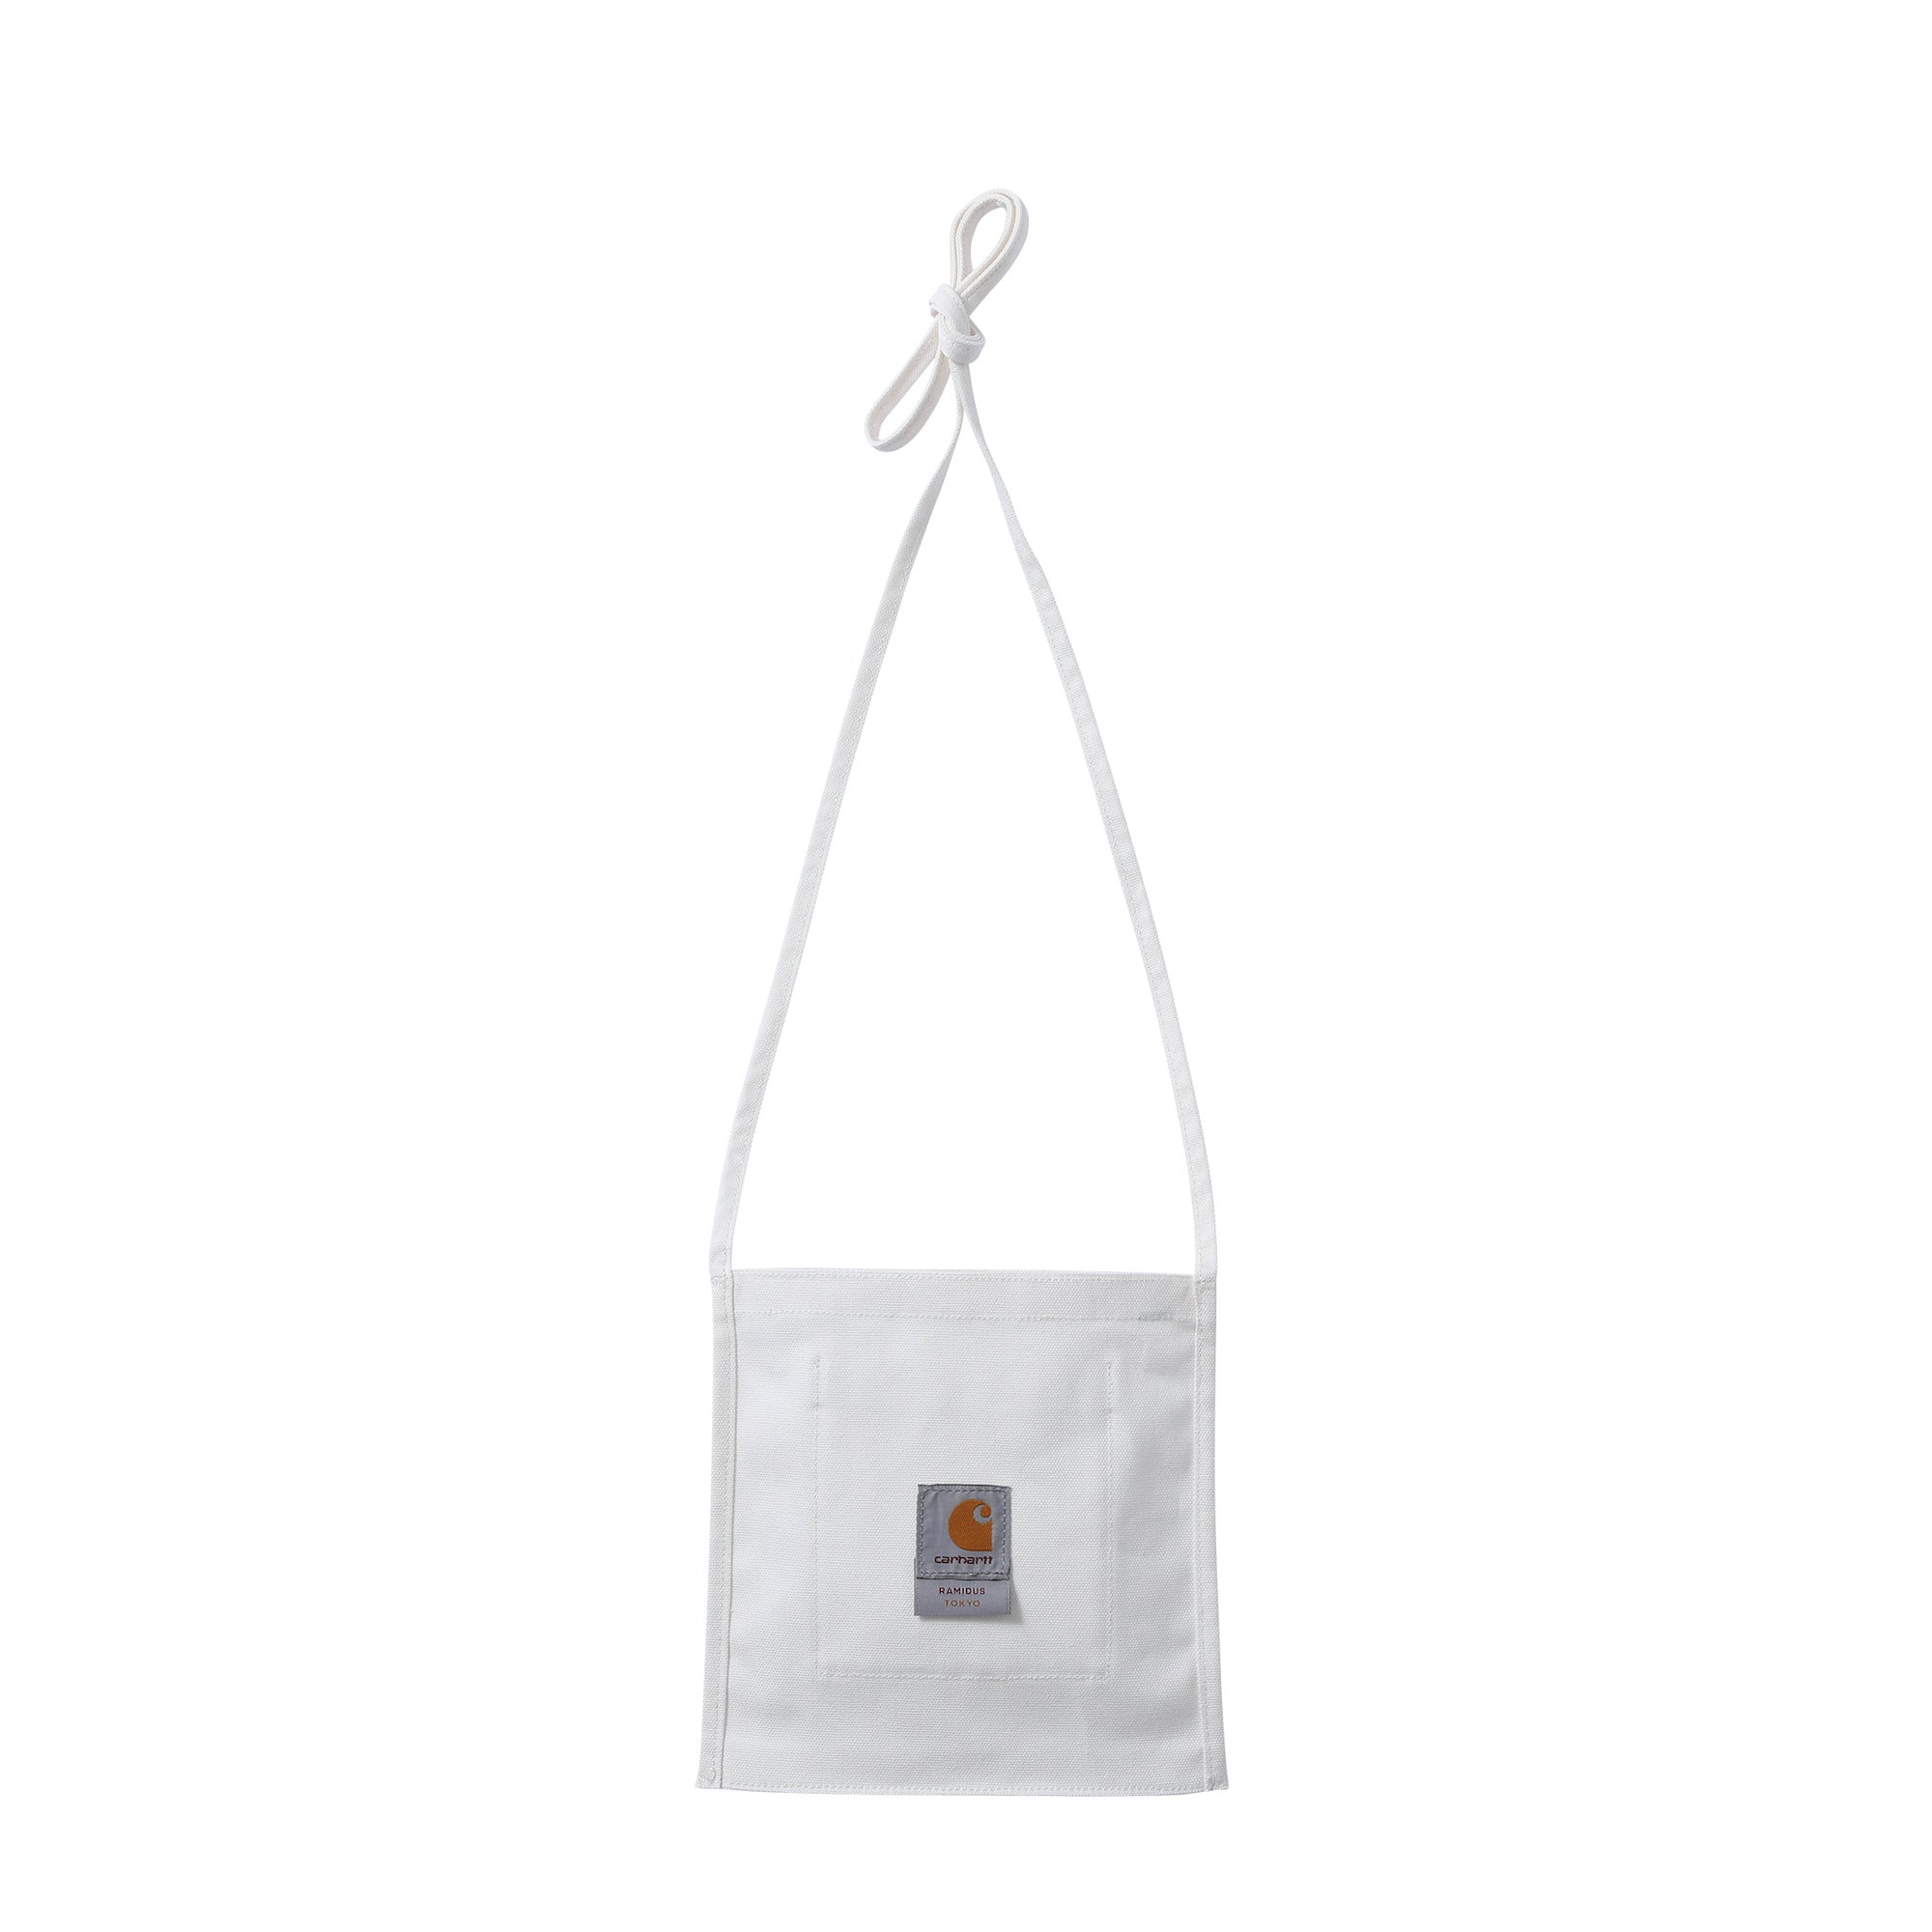 Just Right / MS Newspaper Bag by W.Z.SAC-